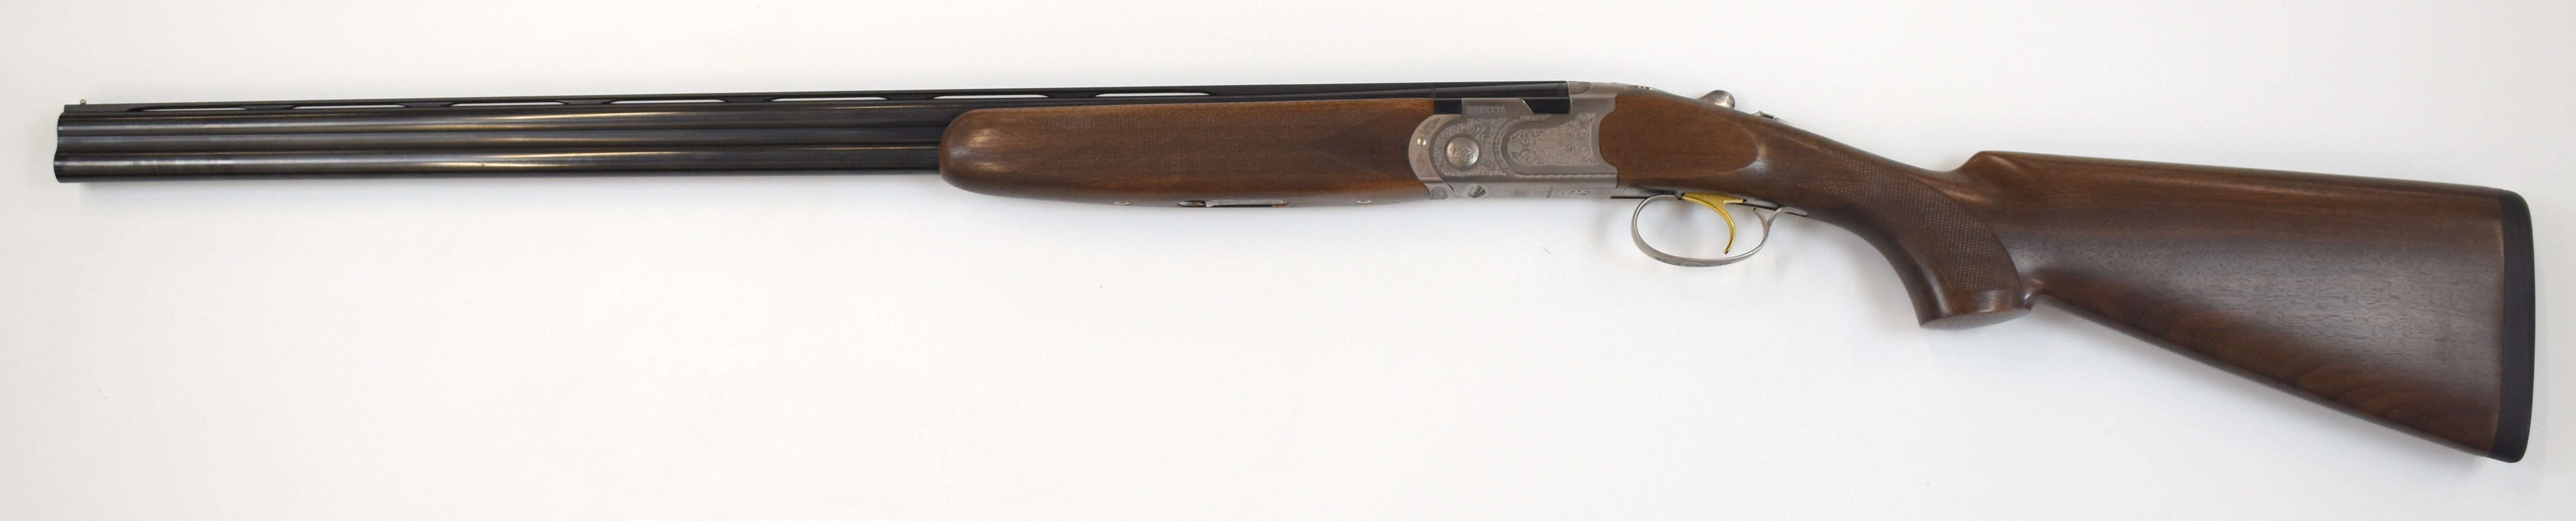 Beretta 686 Silver Pigeon I 28 bore over and under ejector shotgun with named and engraved lock - Image 9 of 28